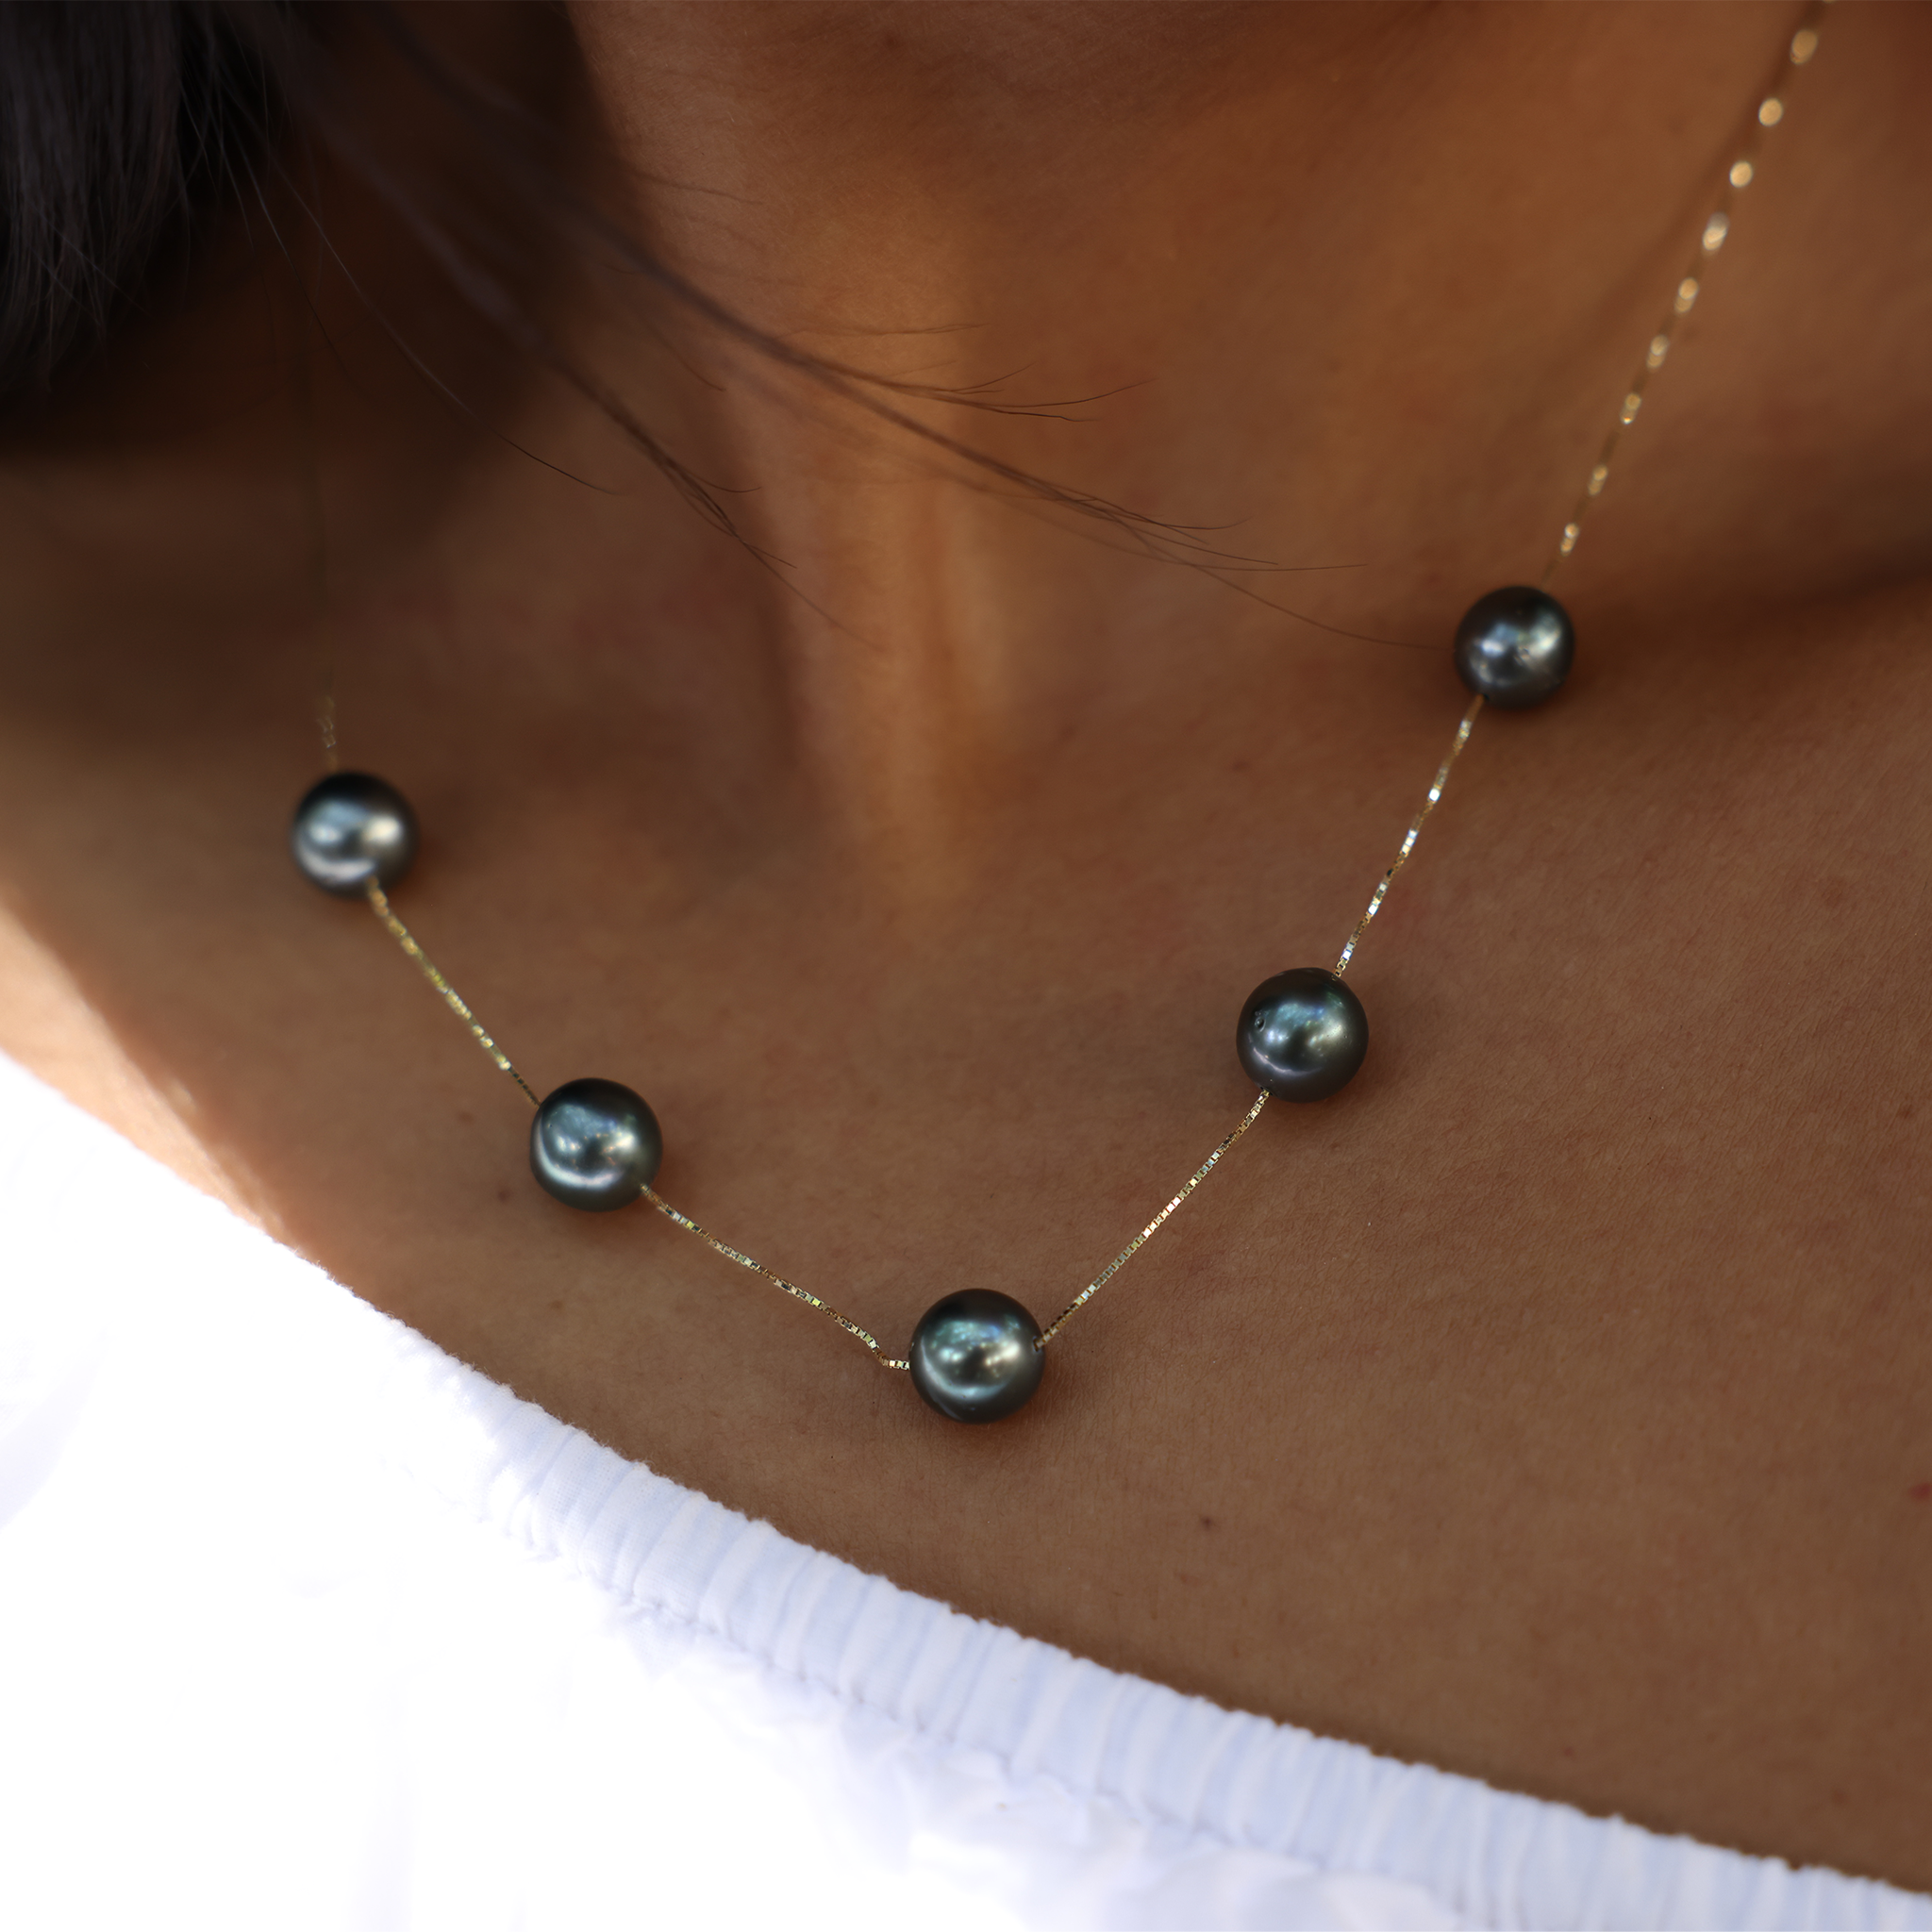 18" Tahitian Black Pearl Necklace in Gold - 9-10mm